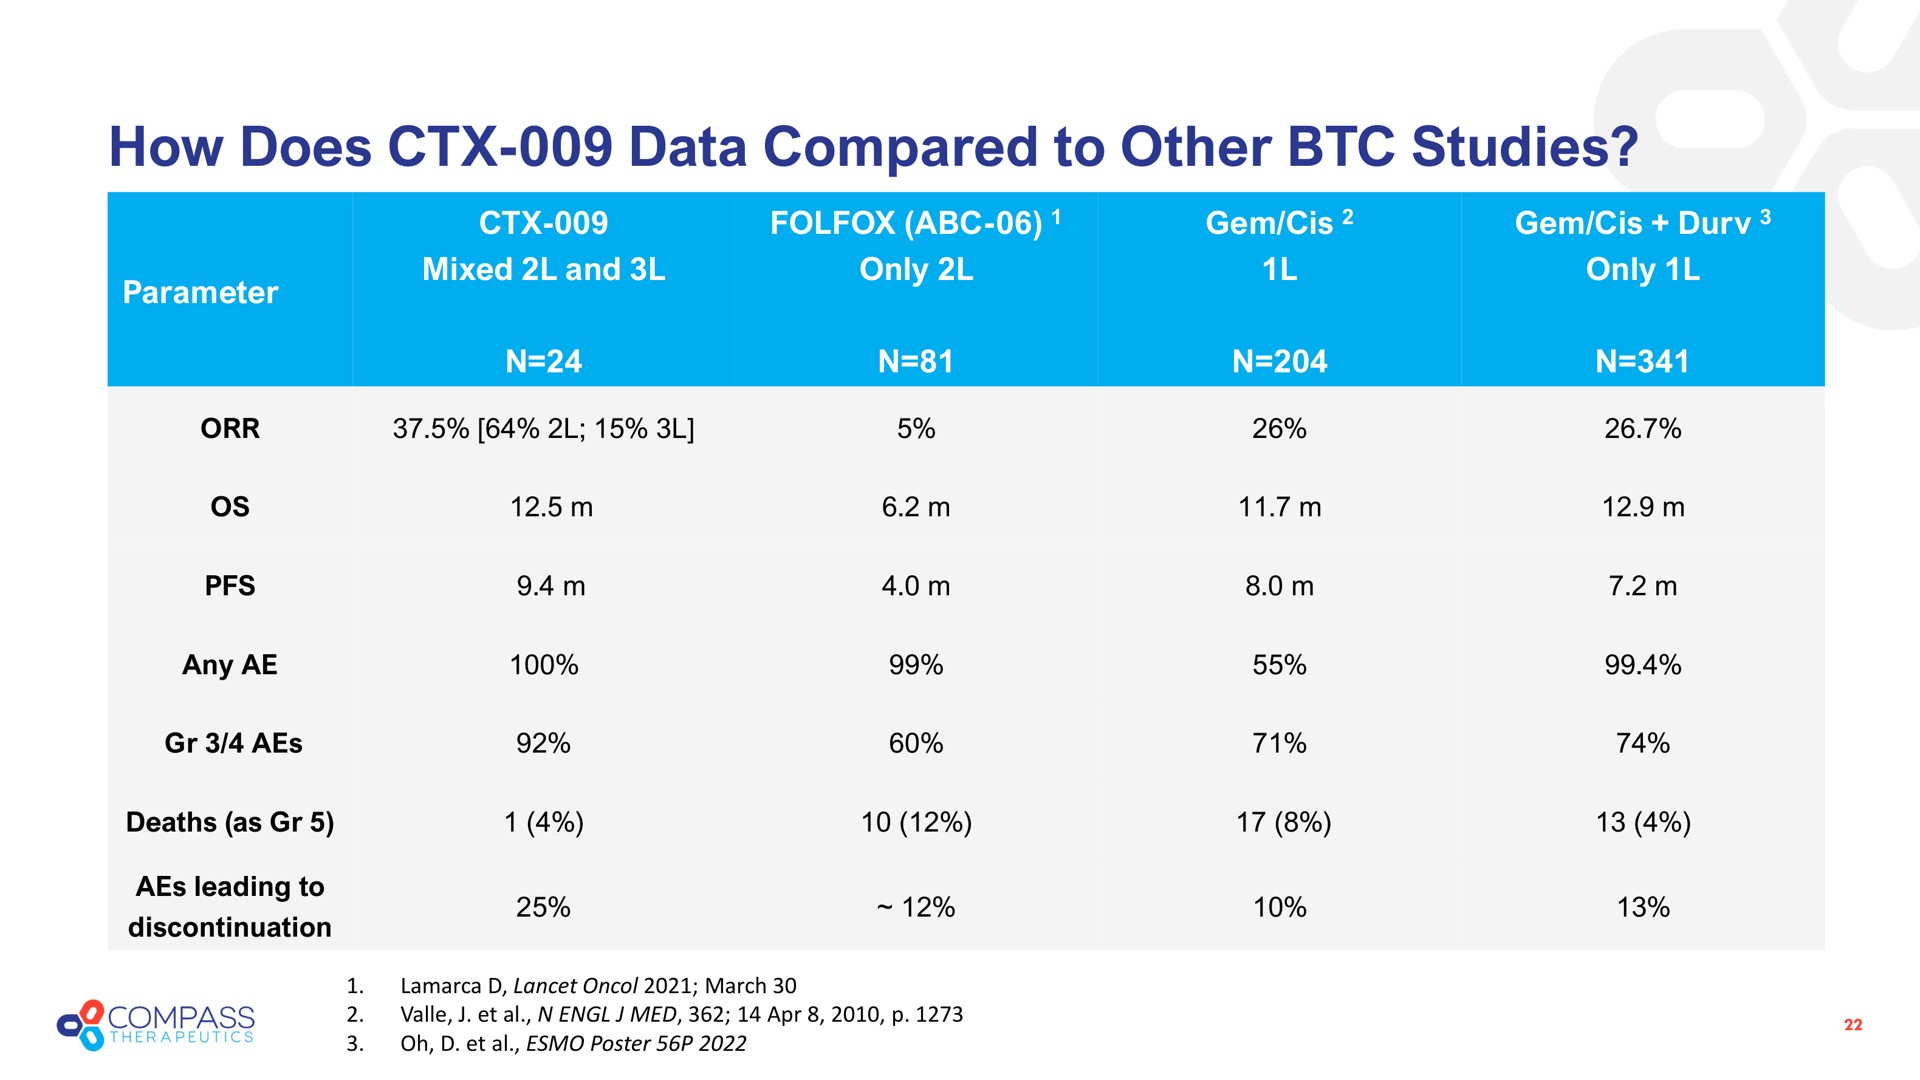 how does data compared to other studies | Compass Therapeutics